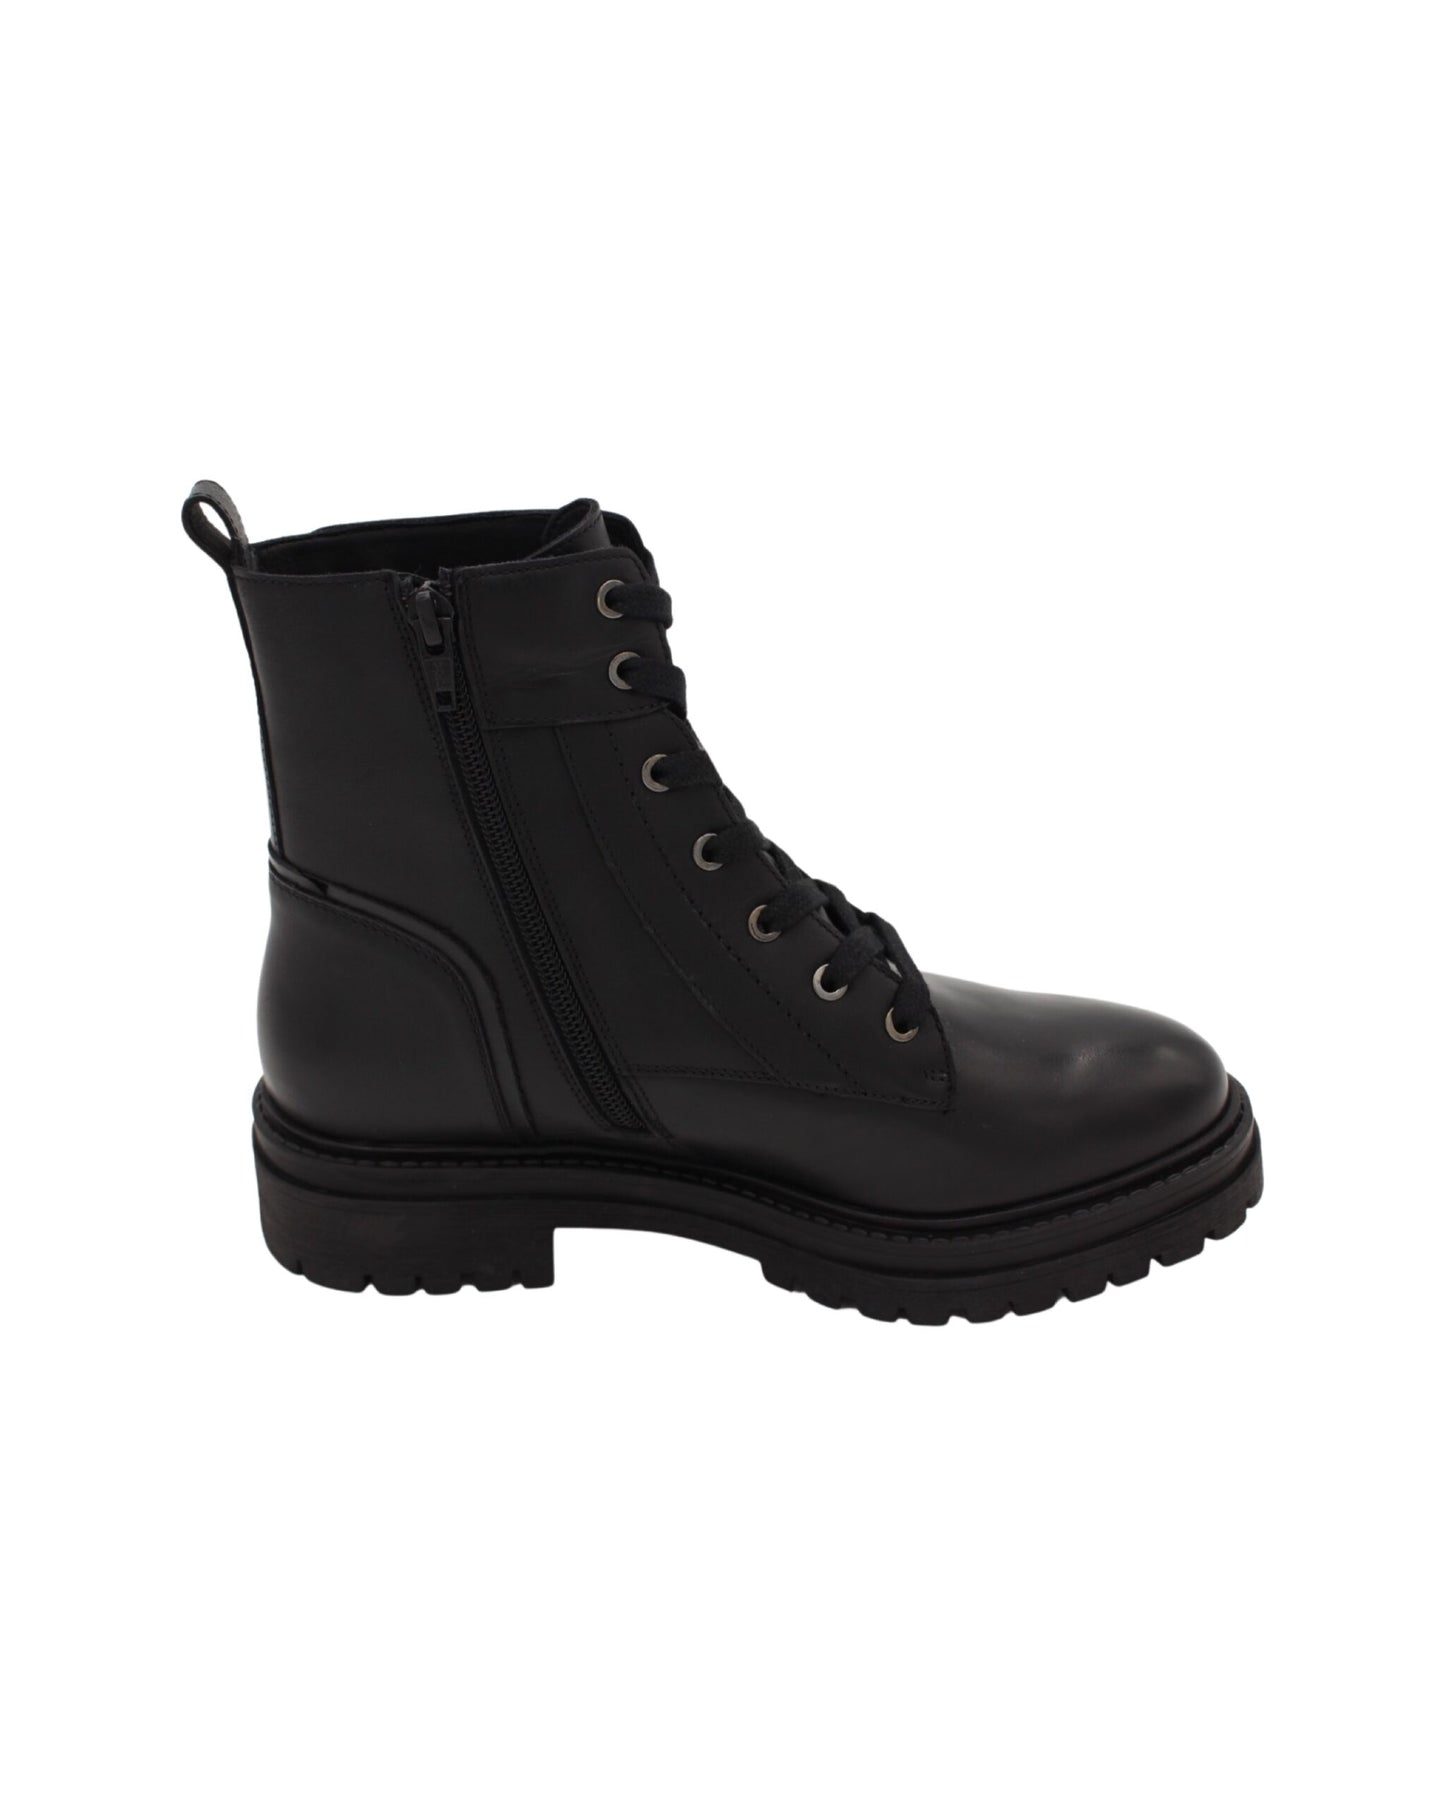 Geox Ankle Boots  Black